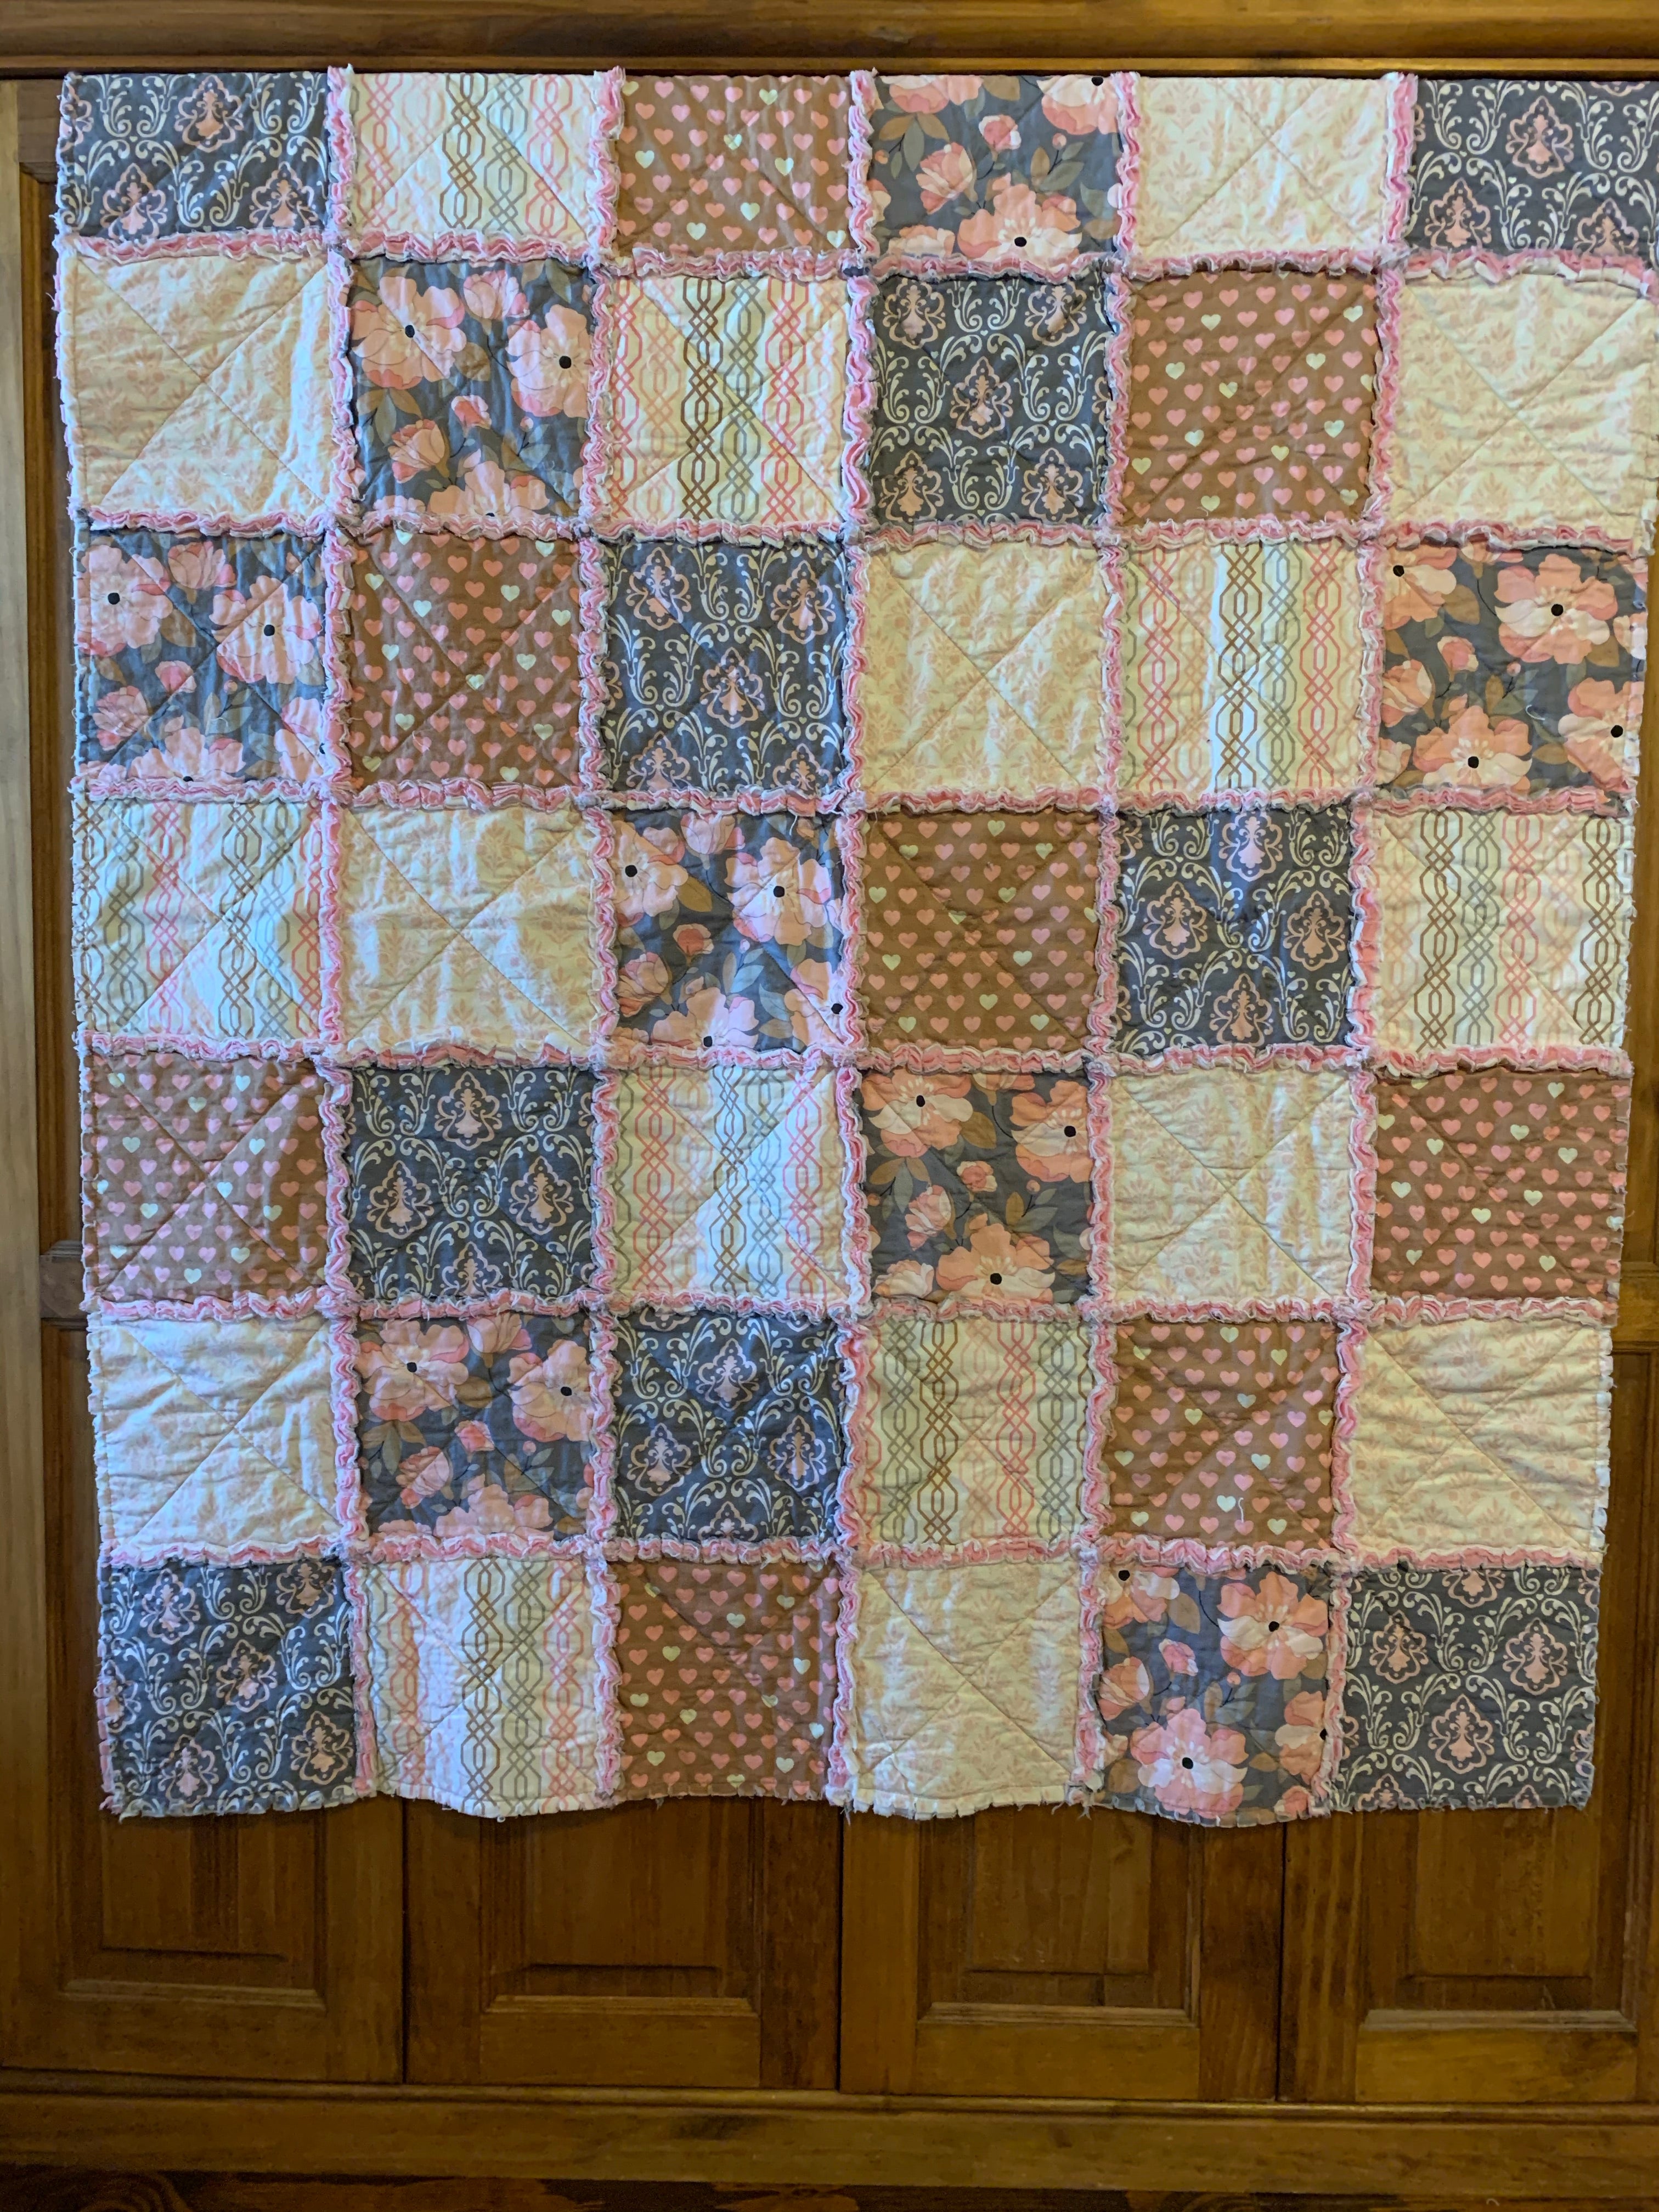 Pink and Gray Child's Quilt 43"x48"